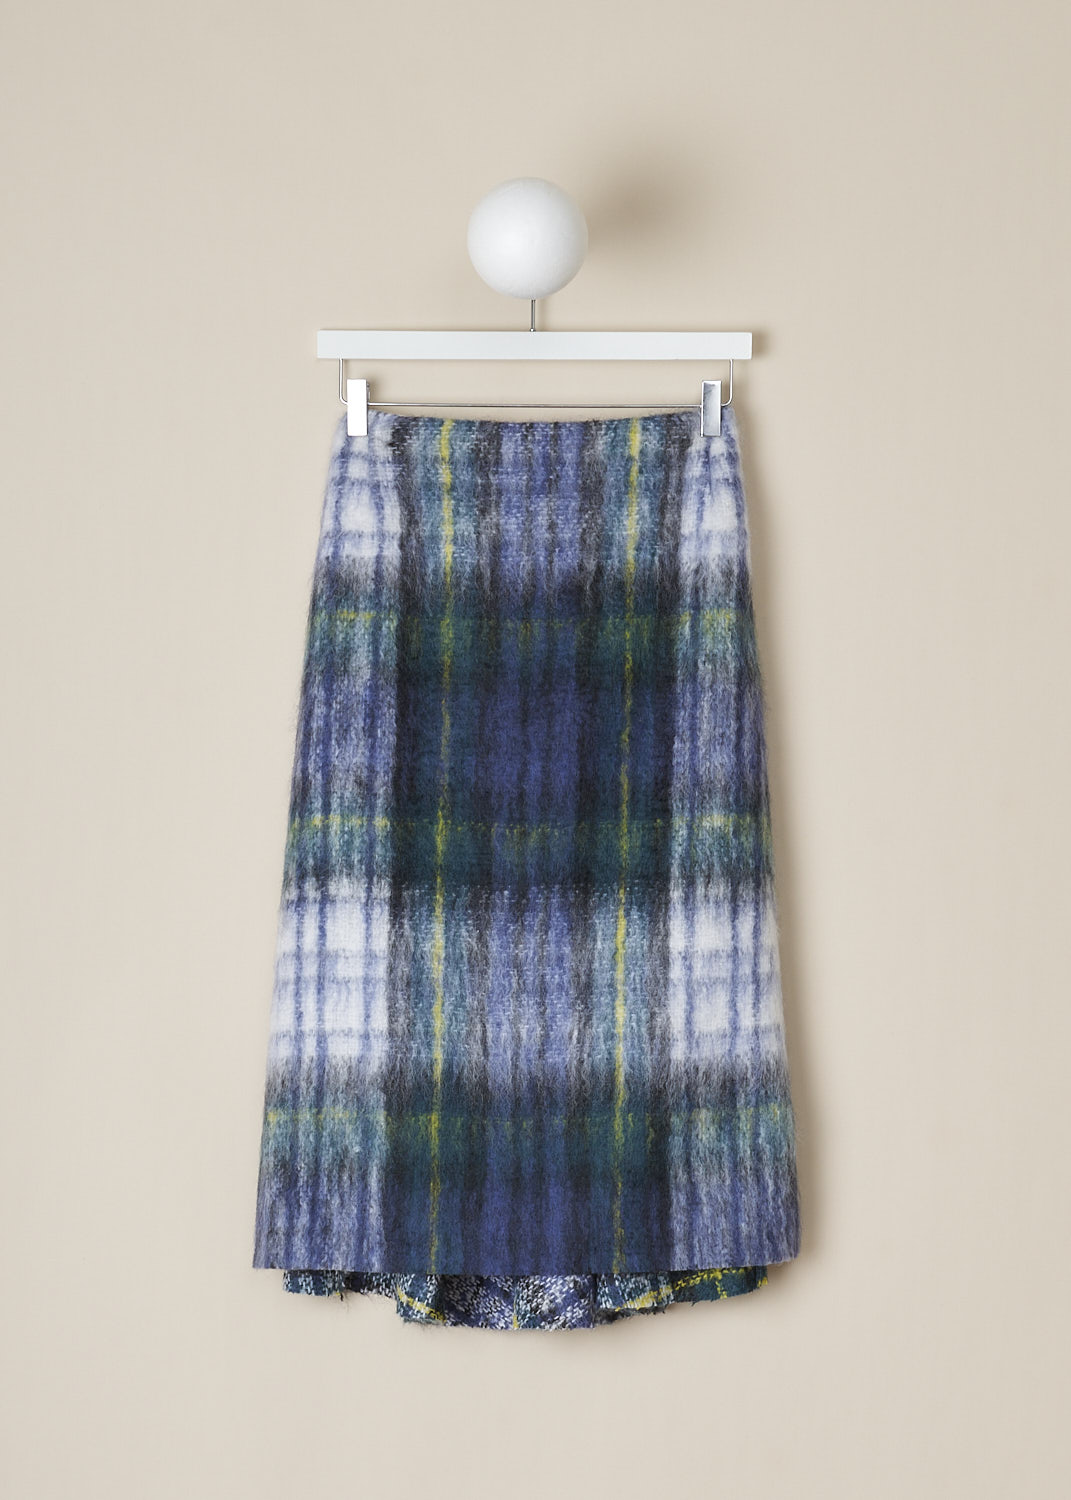 SOFIE Dâ€™HOORE, GREEN TARTAN SECRET SKIRT, SECRET_WOMO_GREEN_TARTAN, Green, blue, Print, Front, This mohair-blend A-line Secret skirt has a green tartan pattern. The skirt has a concealed side zip. In the back, the skirt has soft centre pleating. The skirt has slightly asymmetrical hemline, with the coarse side of the plaid peeking out. The skirt is fully lined. 
